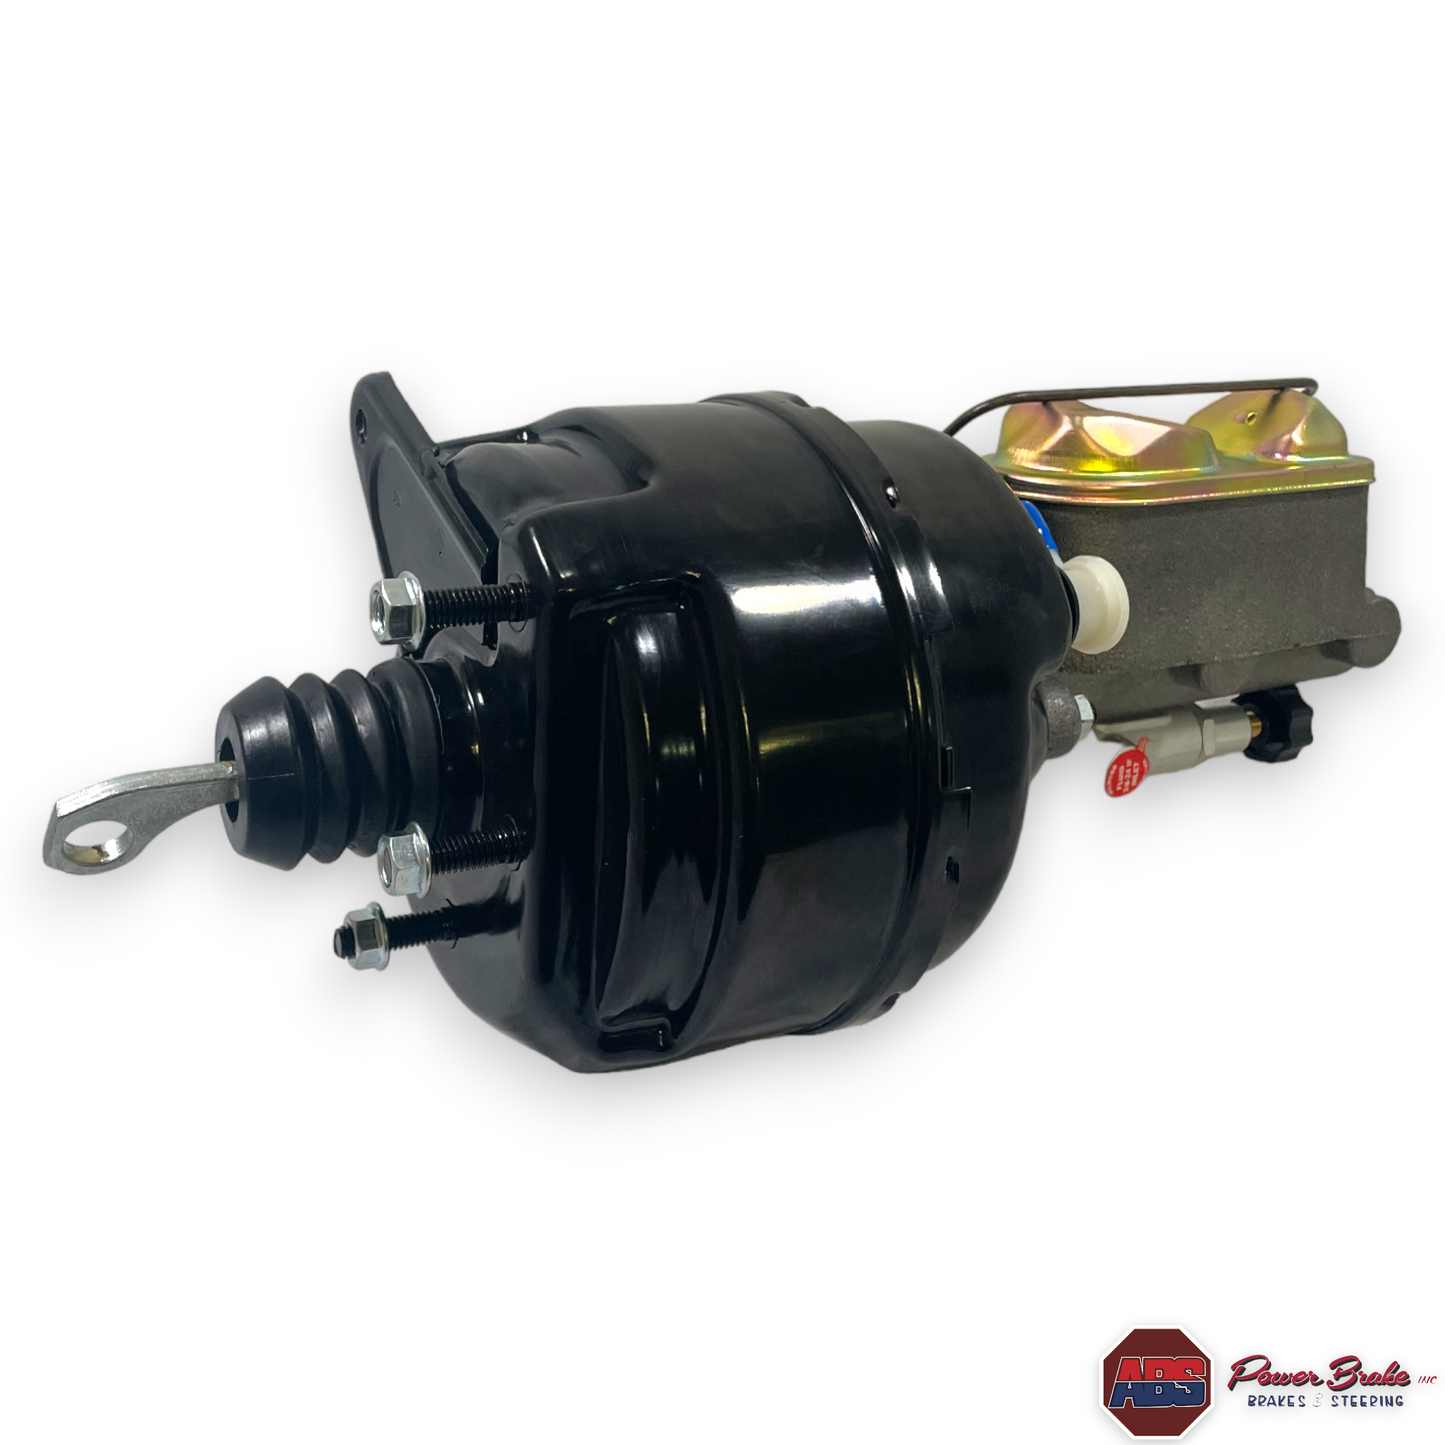 #9779-S 1967-69 Ford Mustang AT Power Brake Booster Combo